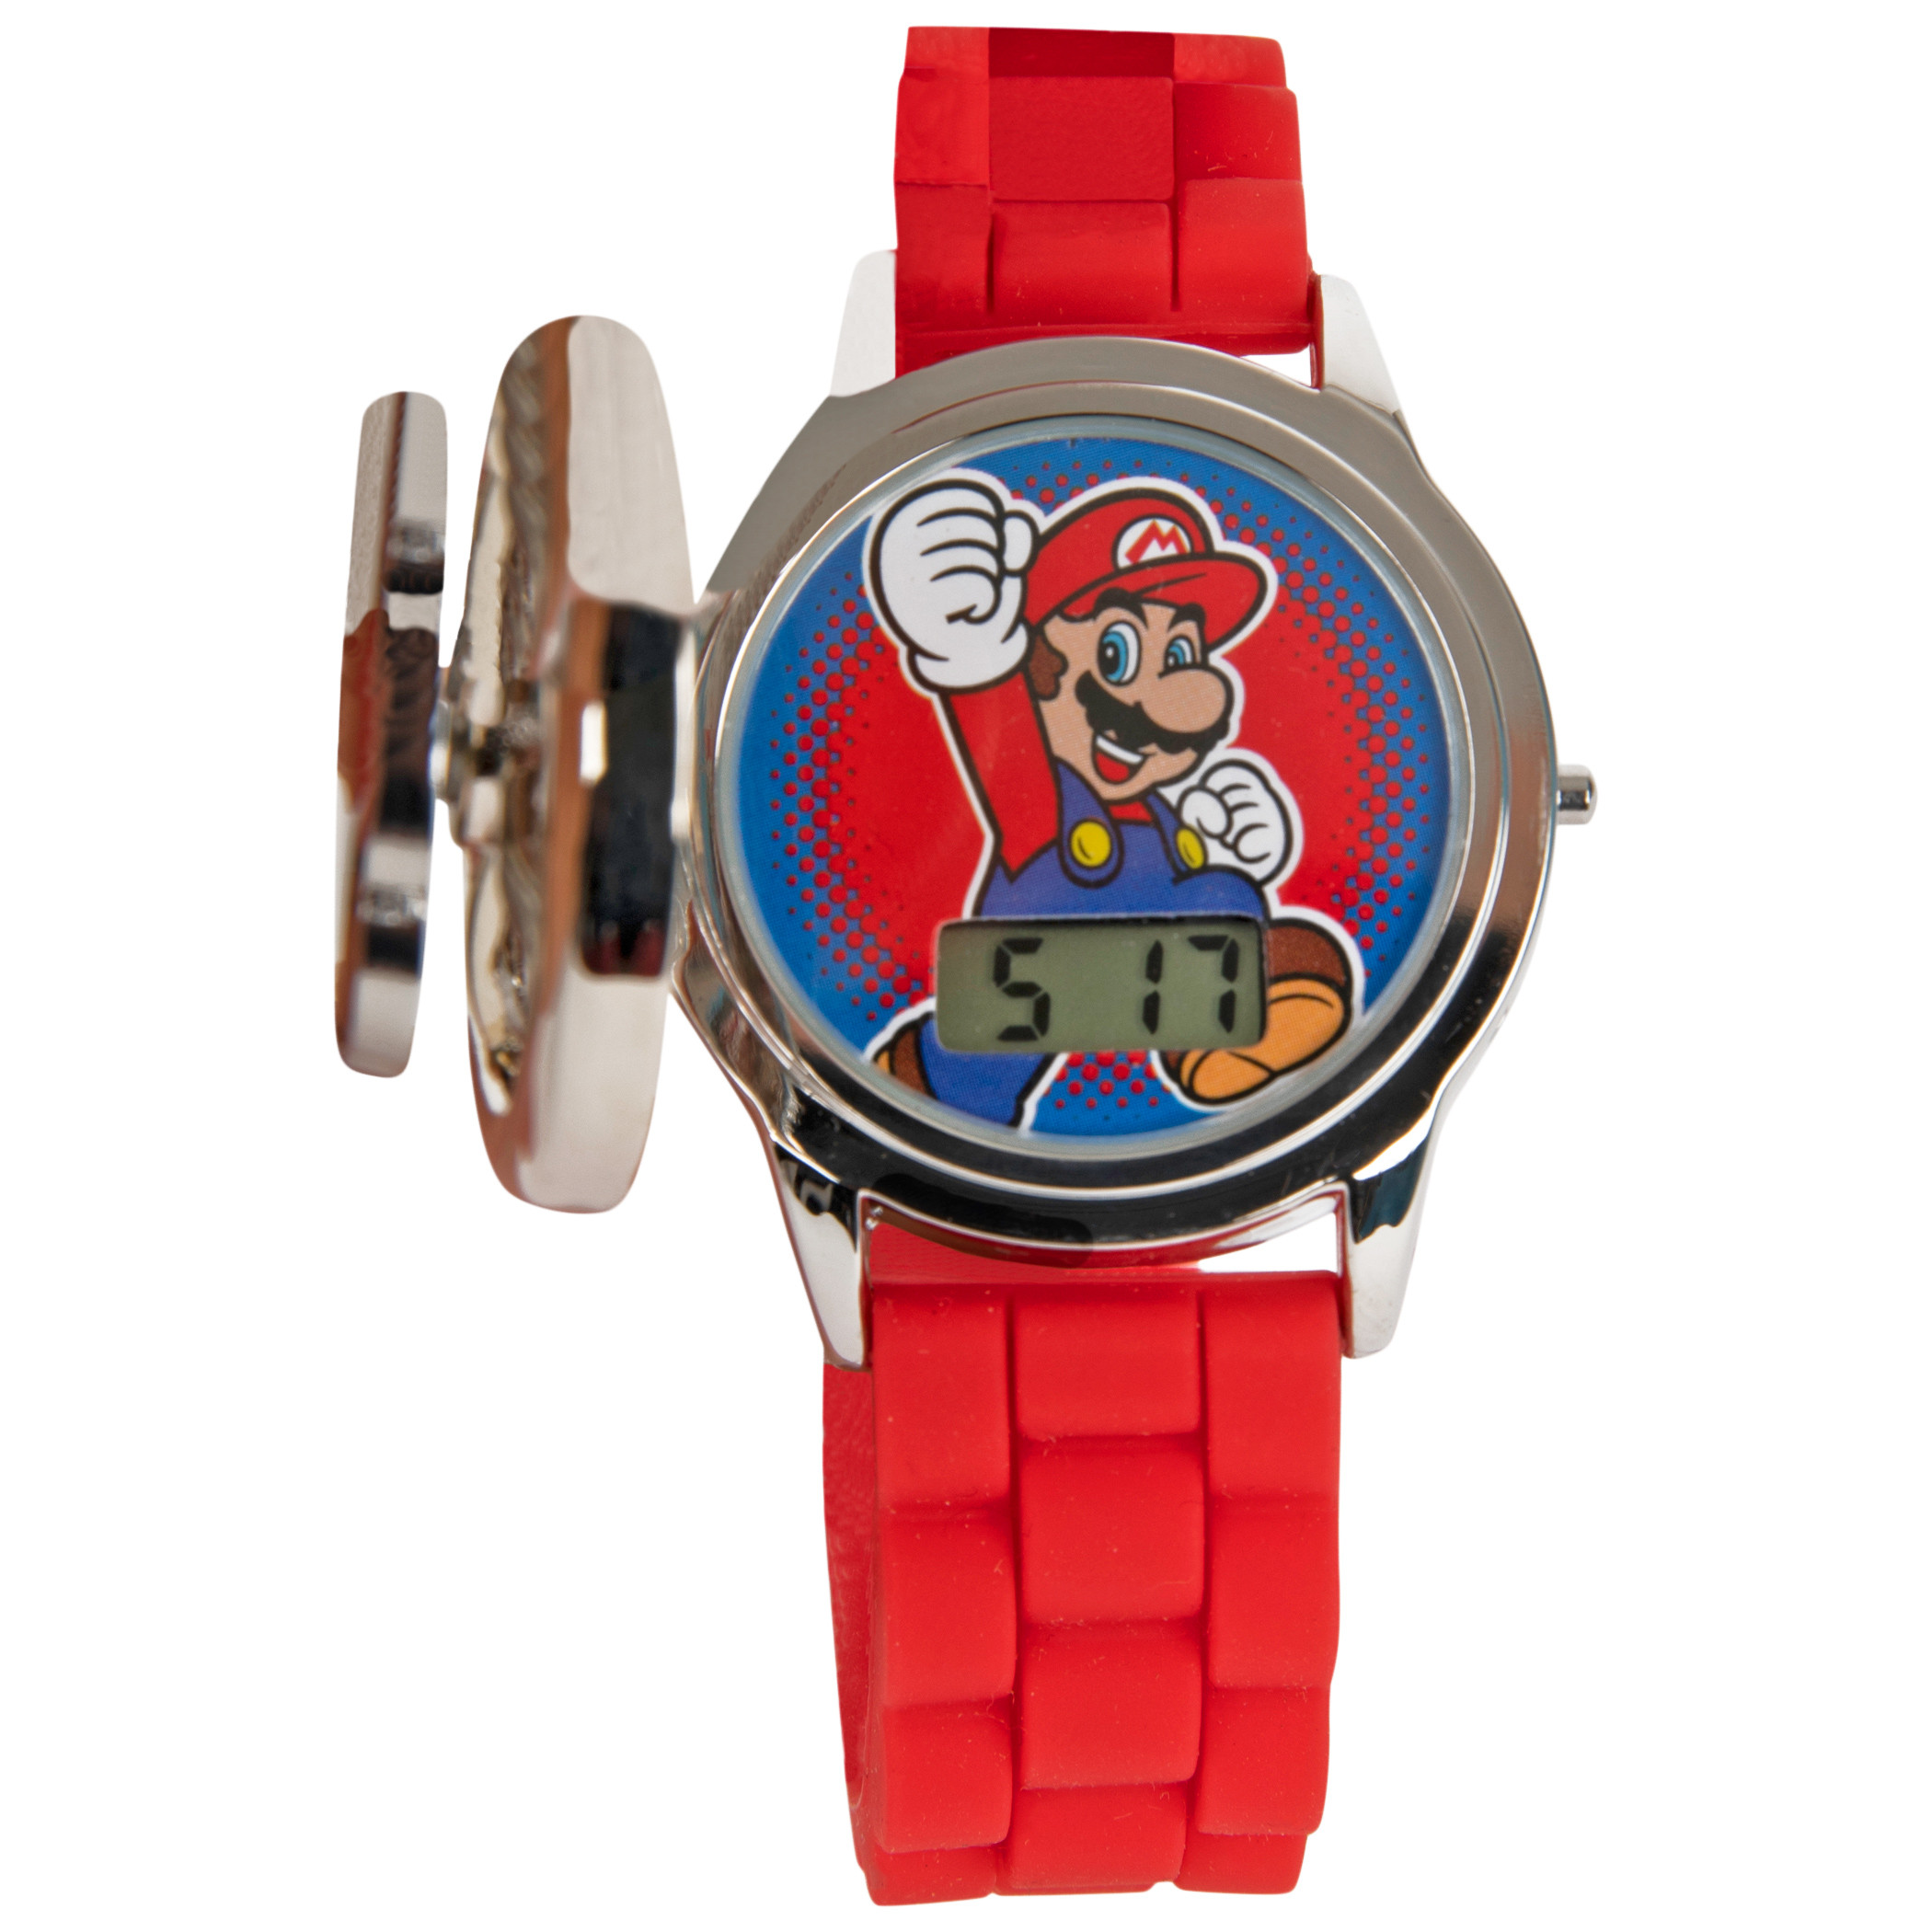 Super Mario Spinning Watch Face Cap LCD Watch with Silicone Straps